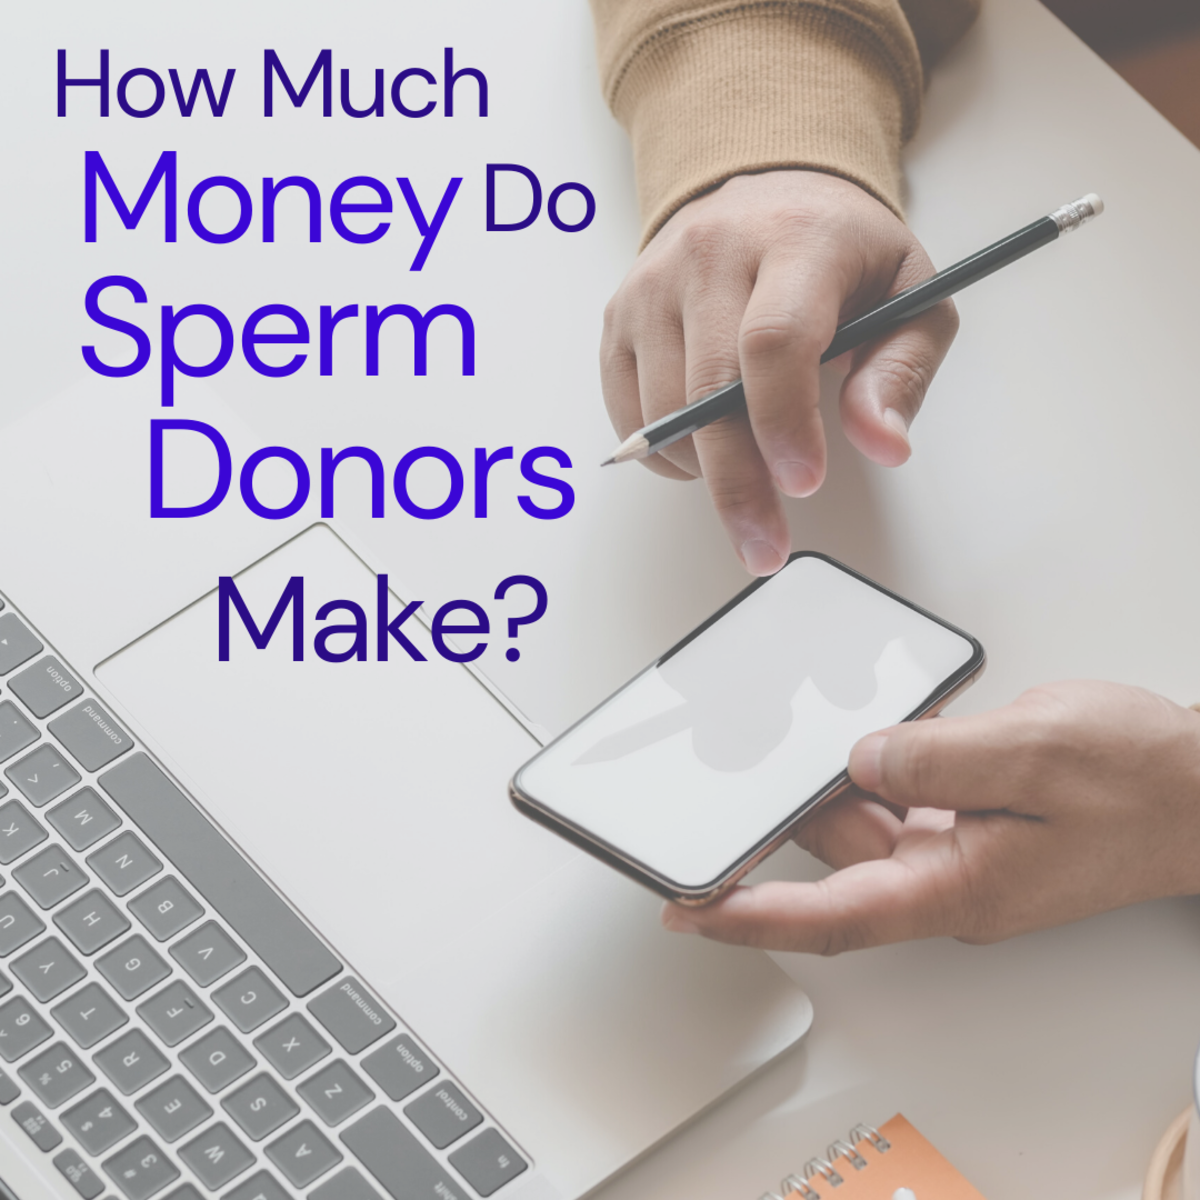 How much money can you make by becoming a sperm donor?